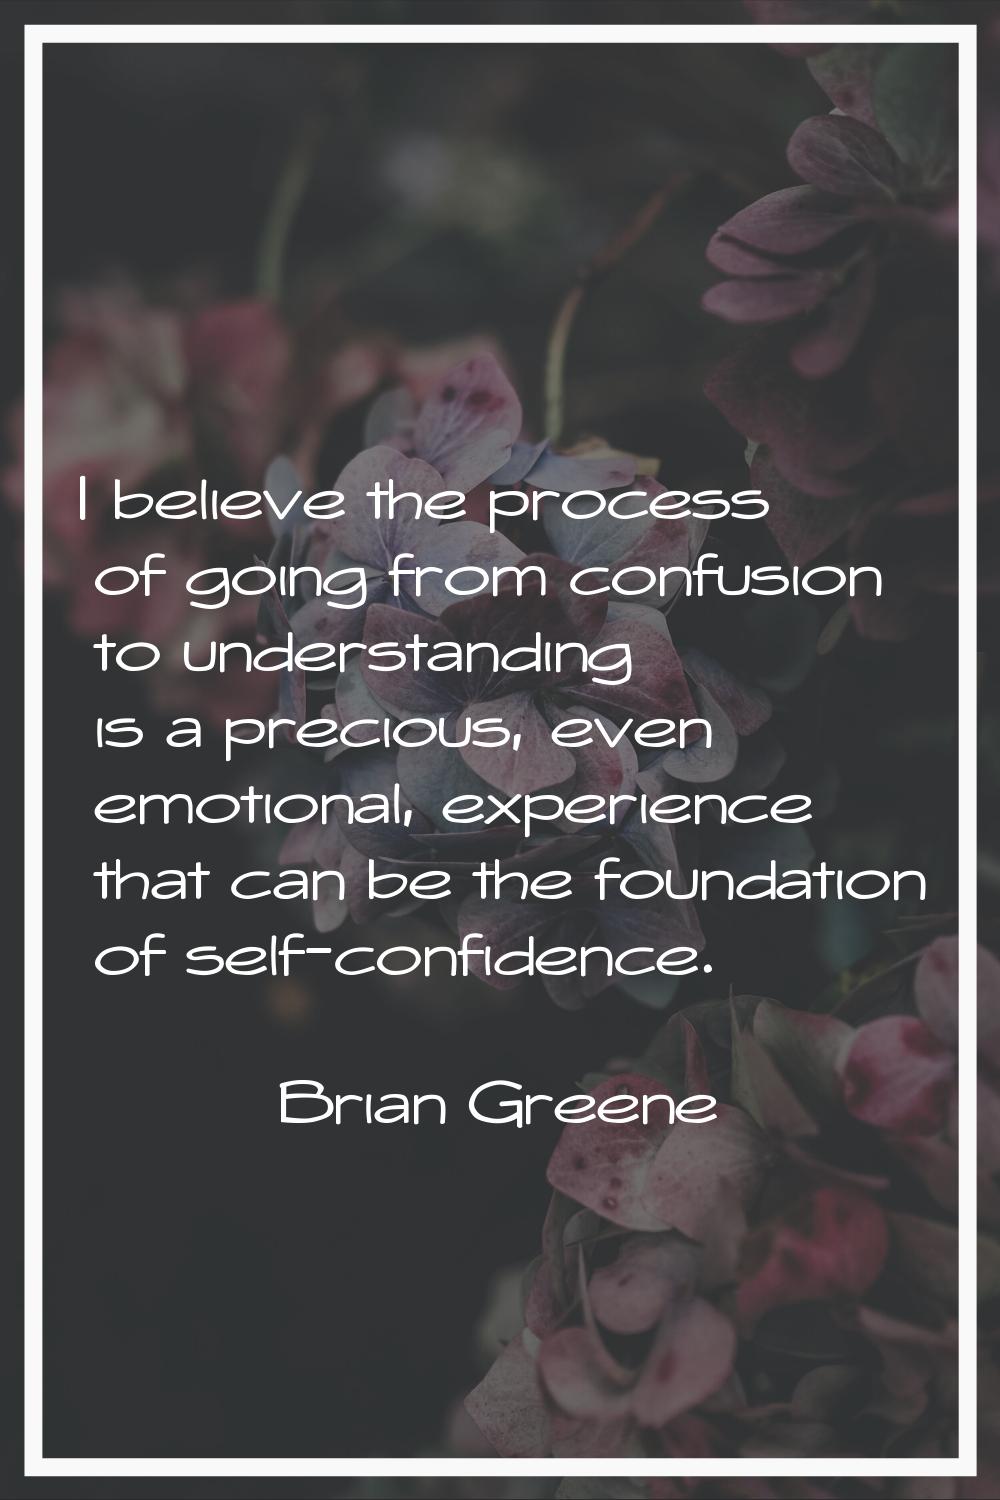 I believe the process of going from confusion to understanding is a precious, even emotional, exper